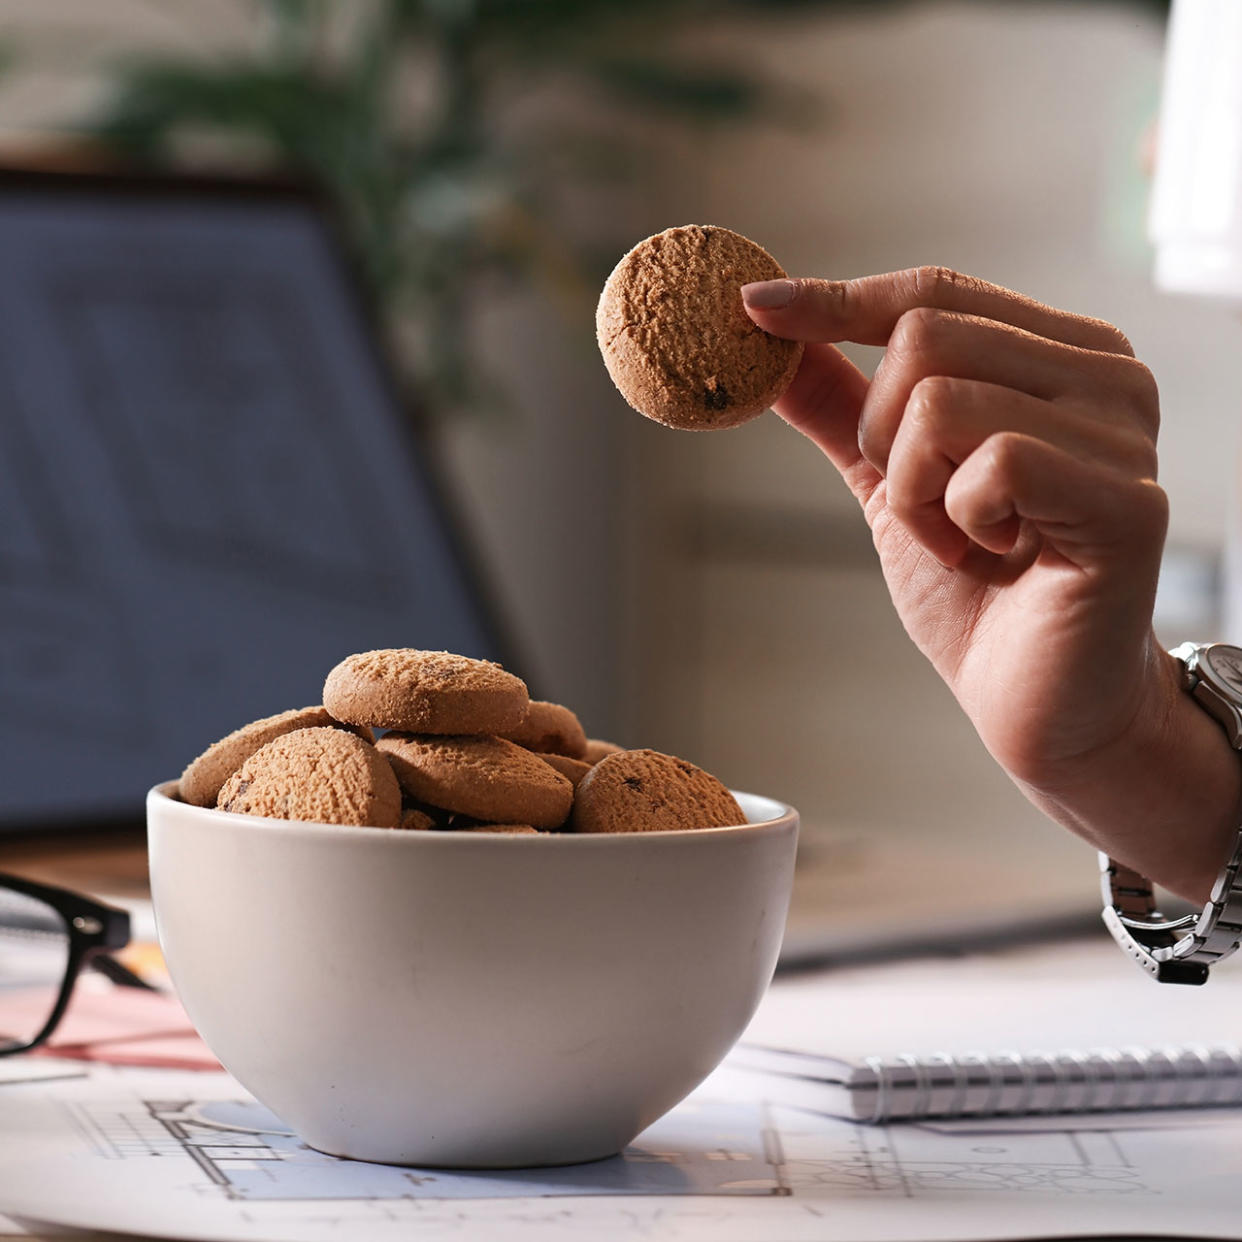 woman snacking on cookies during work